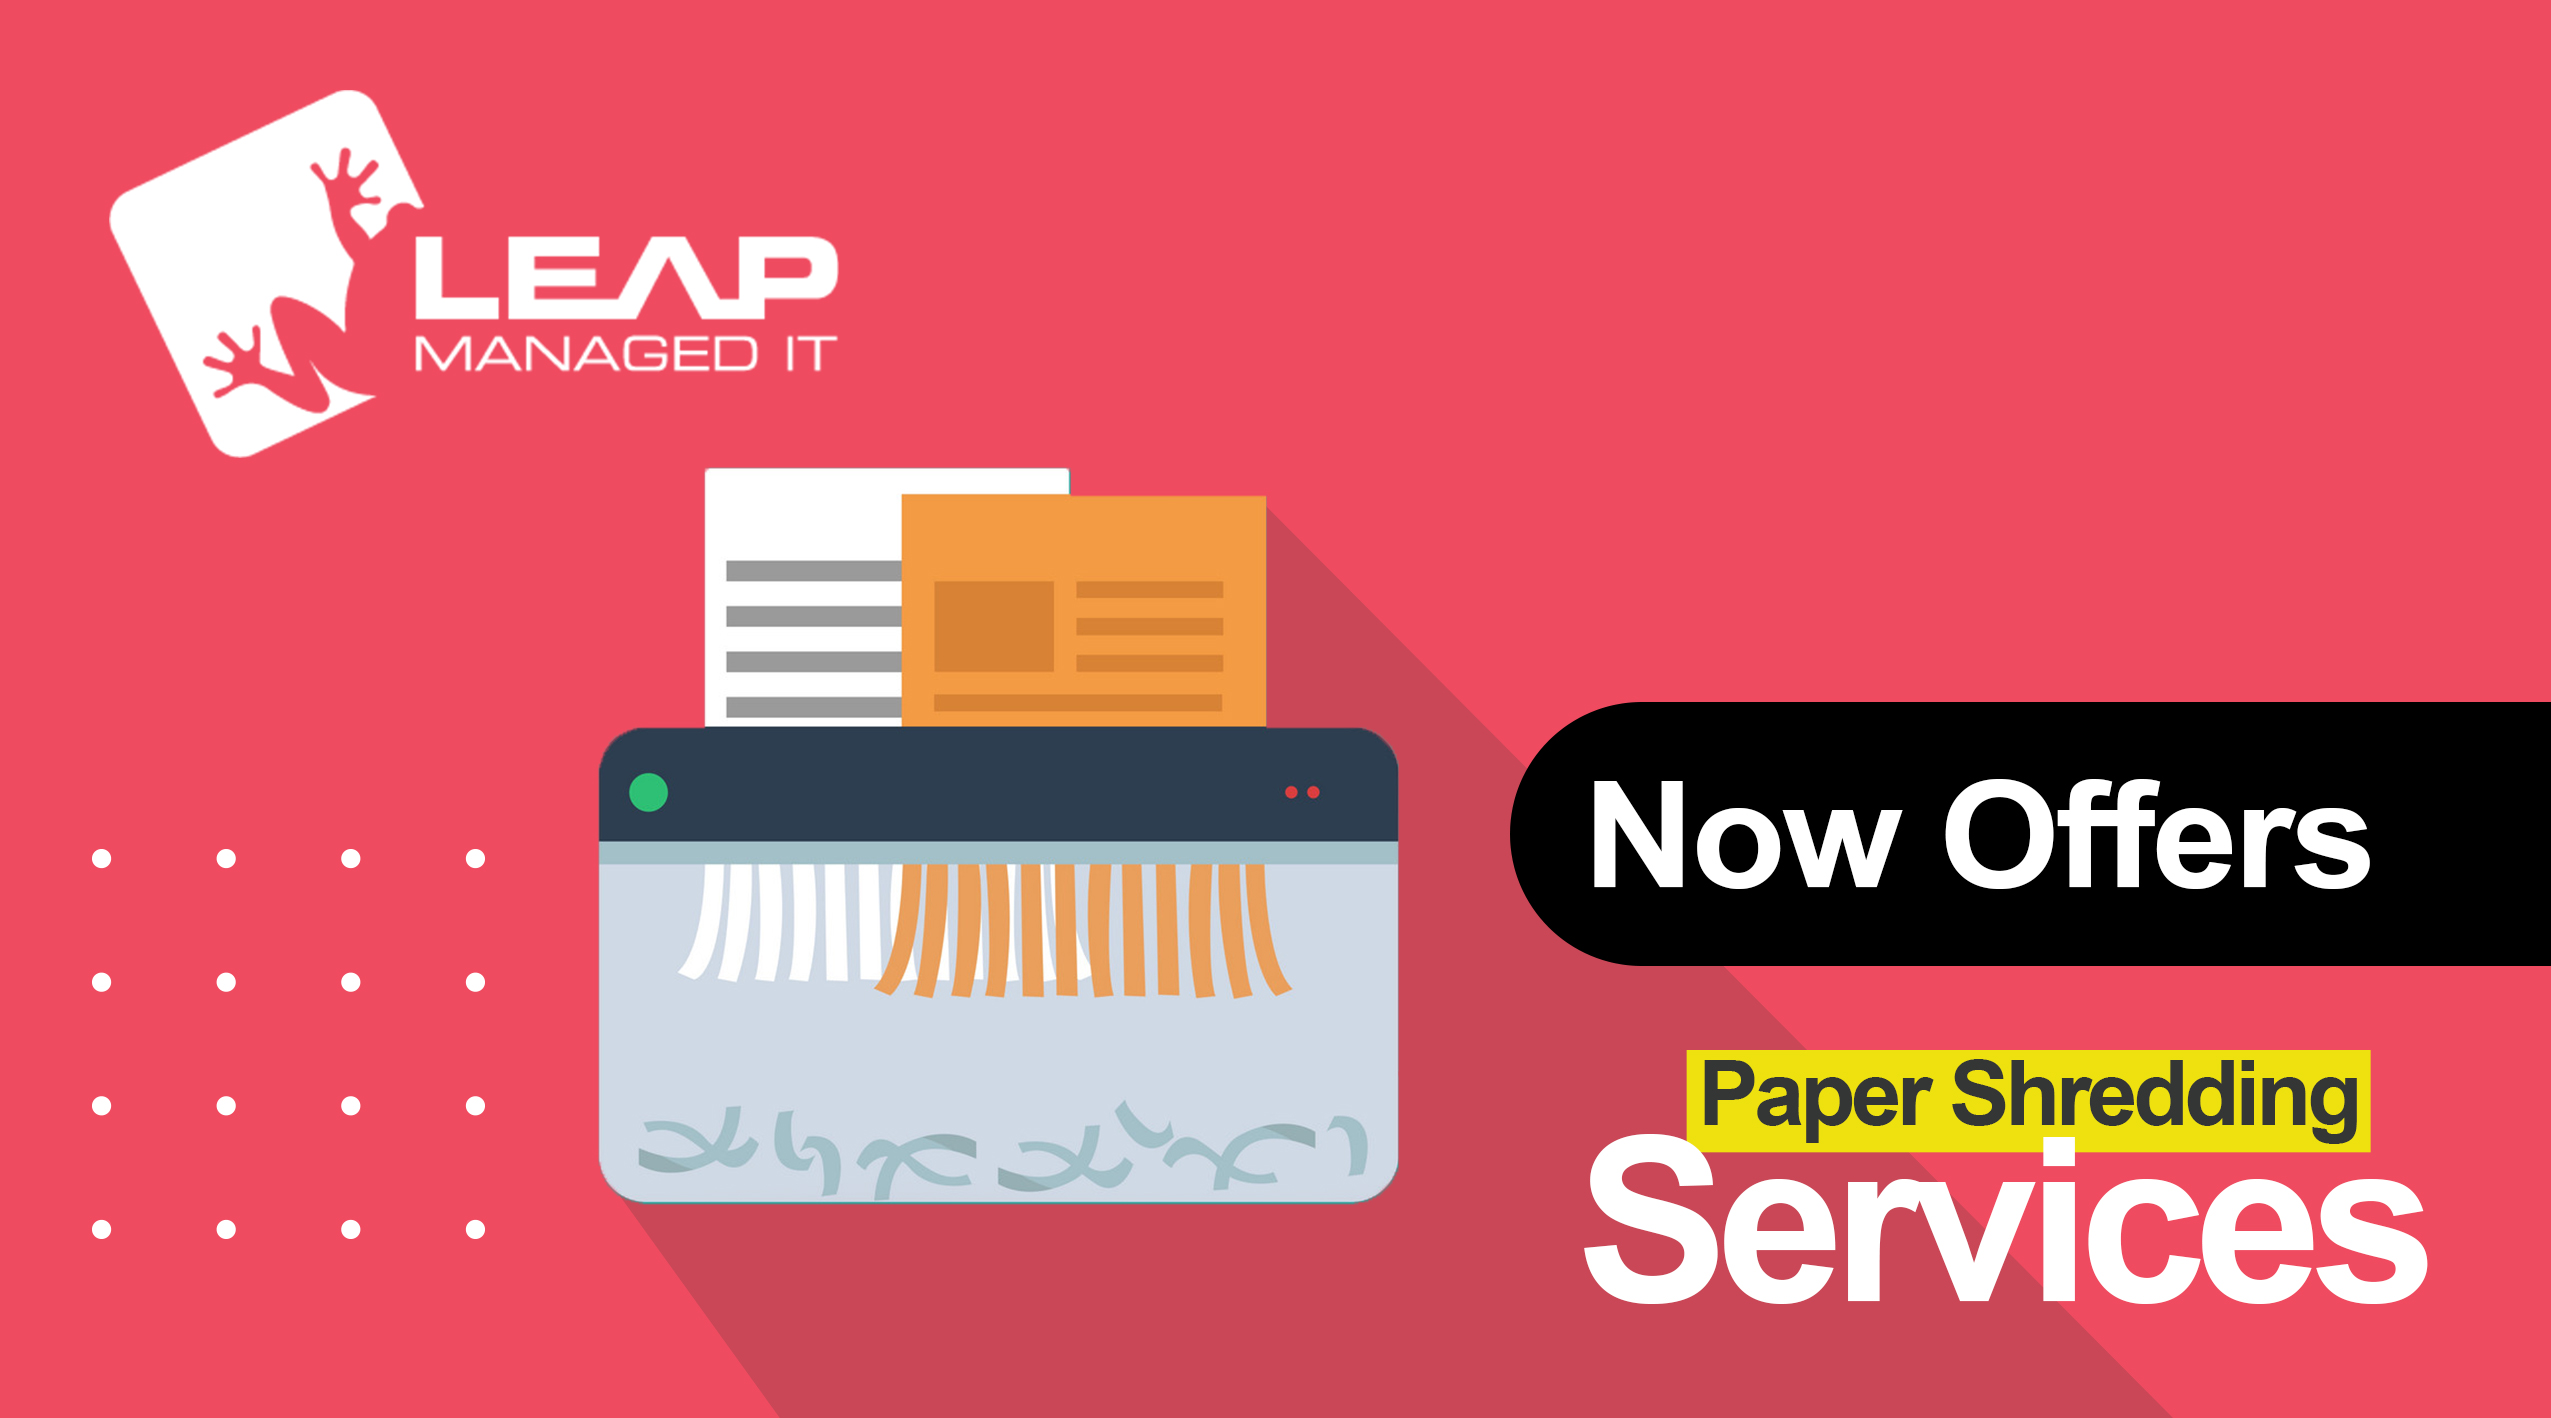 Leap Now Offers Paper Shredding Services